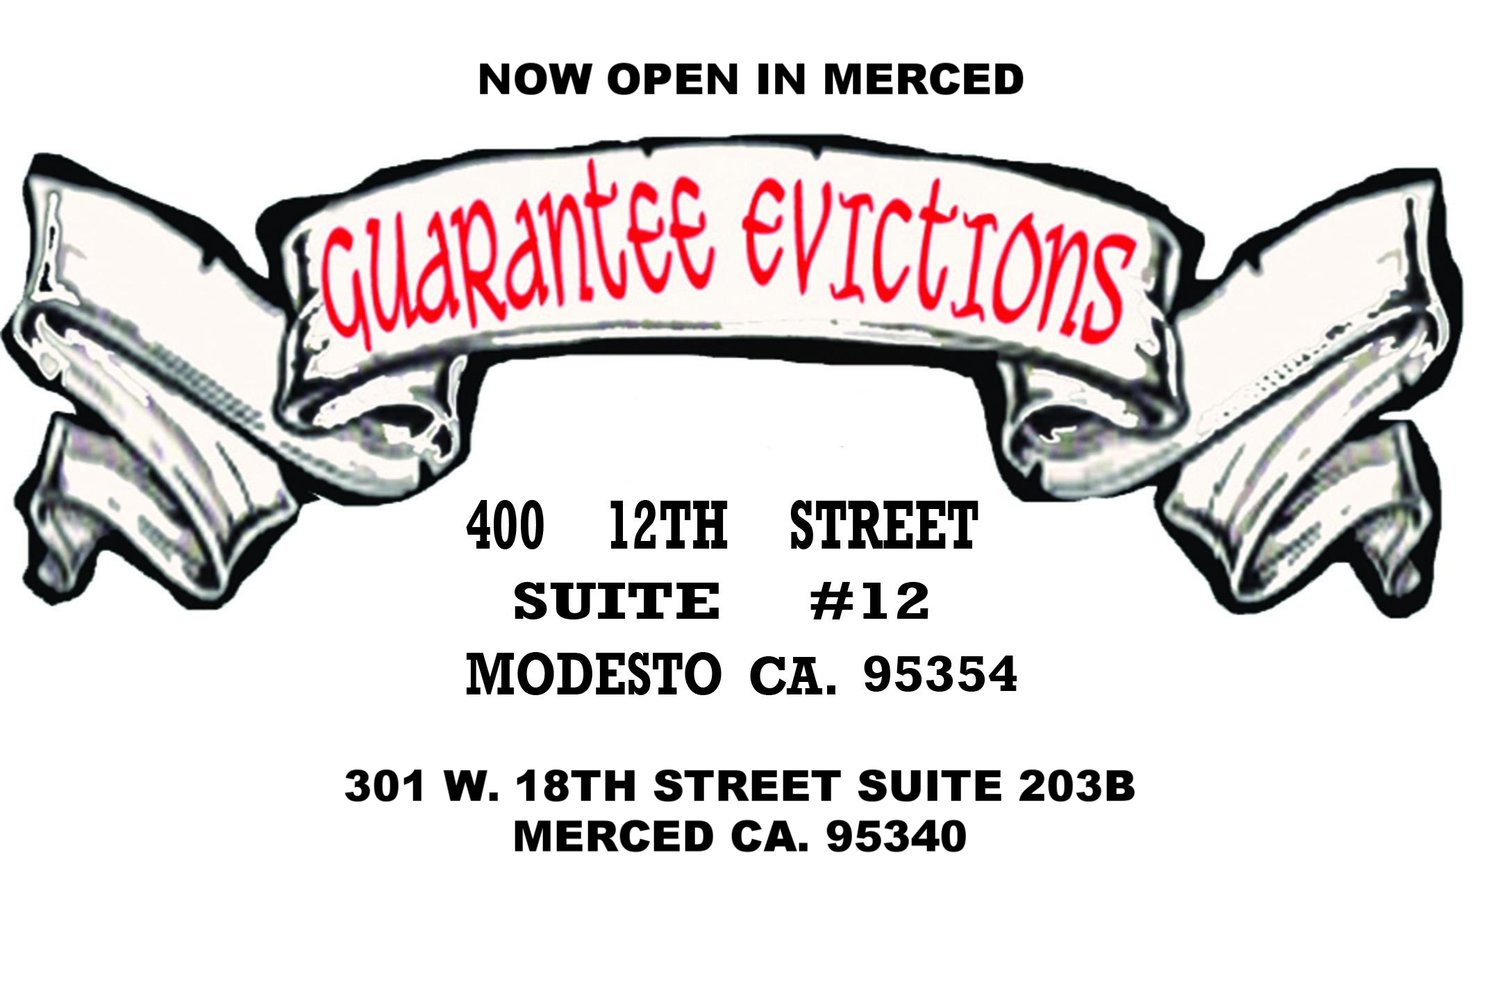 Guarantee Eviction Services